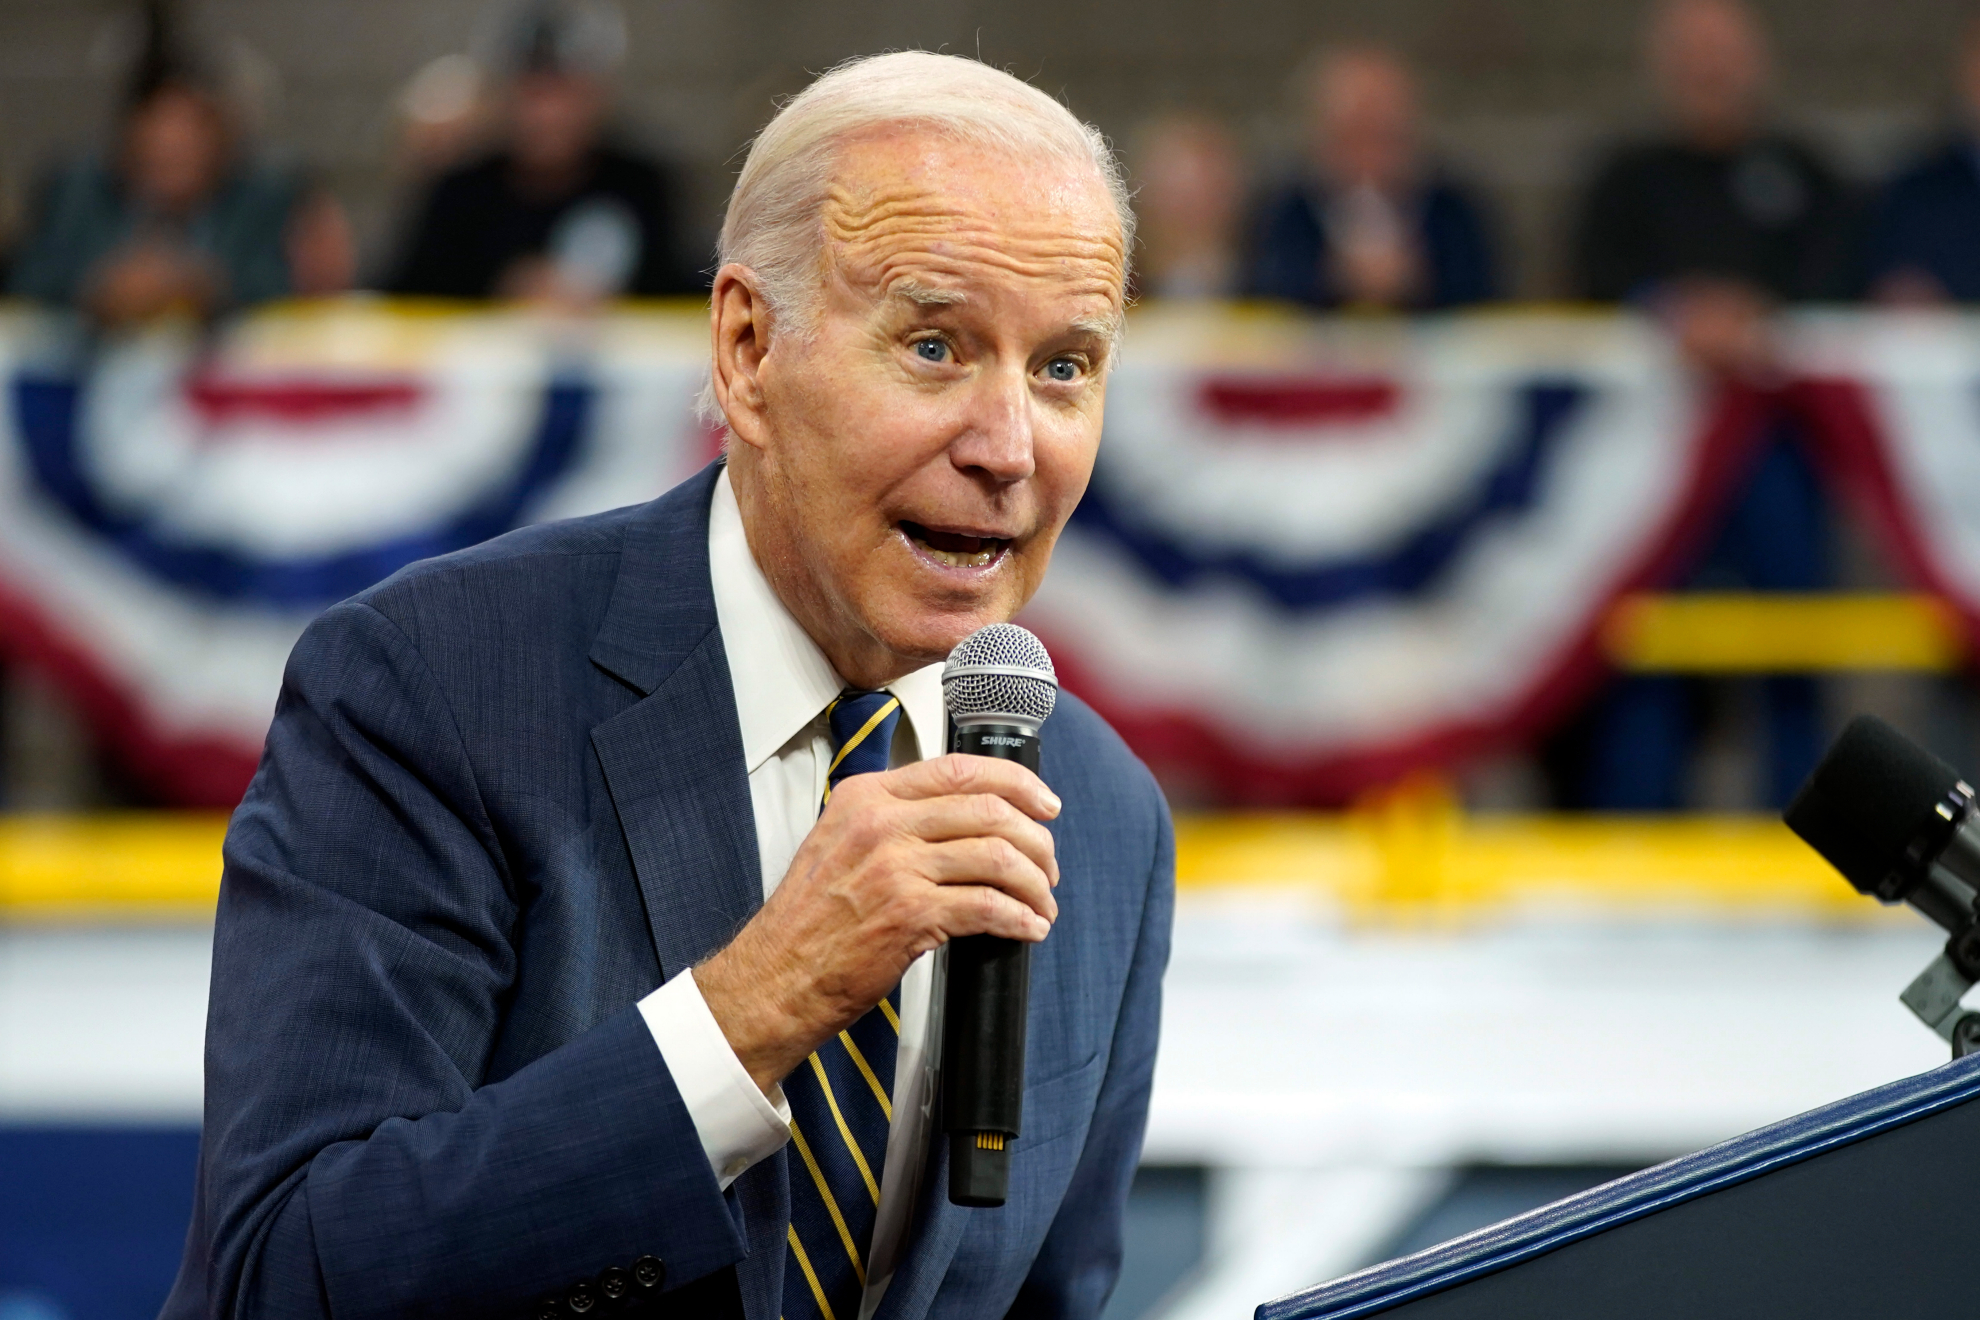 President Joe Biden announced the USMNT's victory over Iran in the World Cup today.